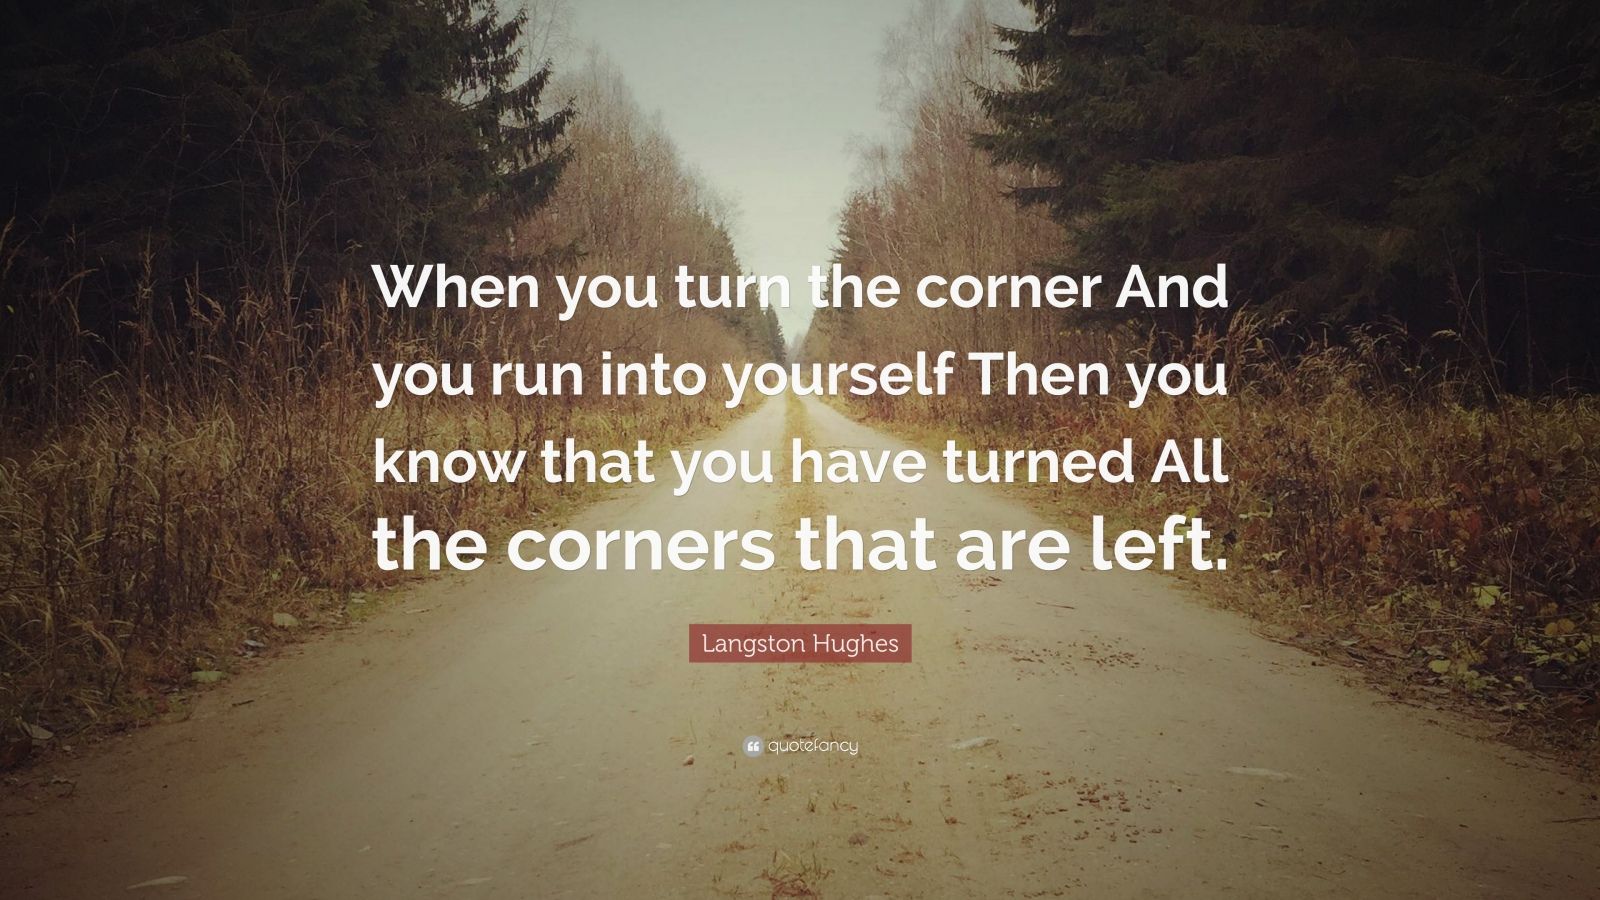 Langston Hughes Quote “When you turn the corner And you